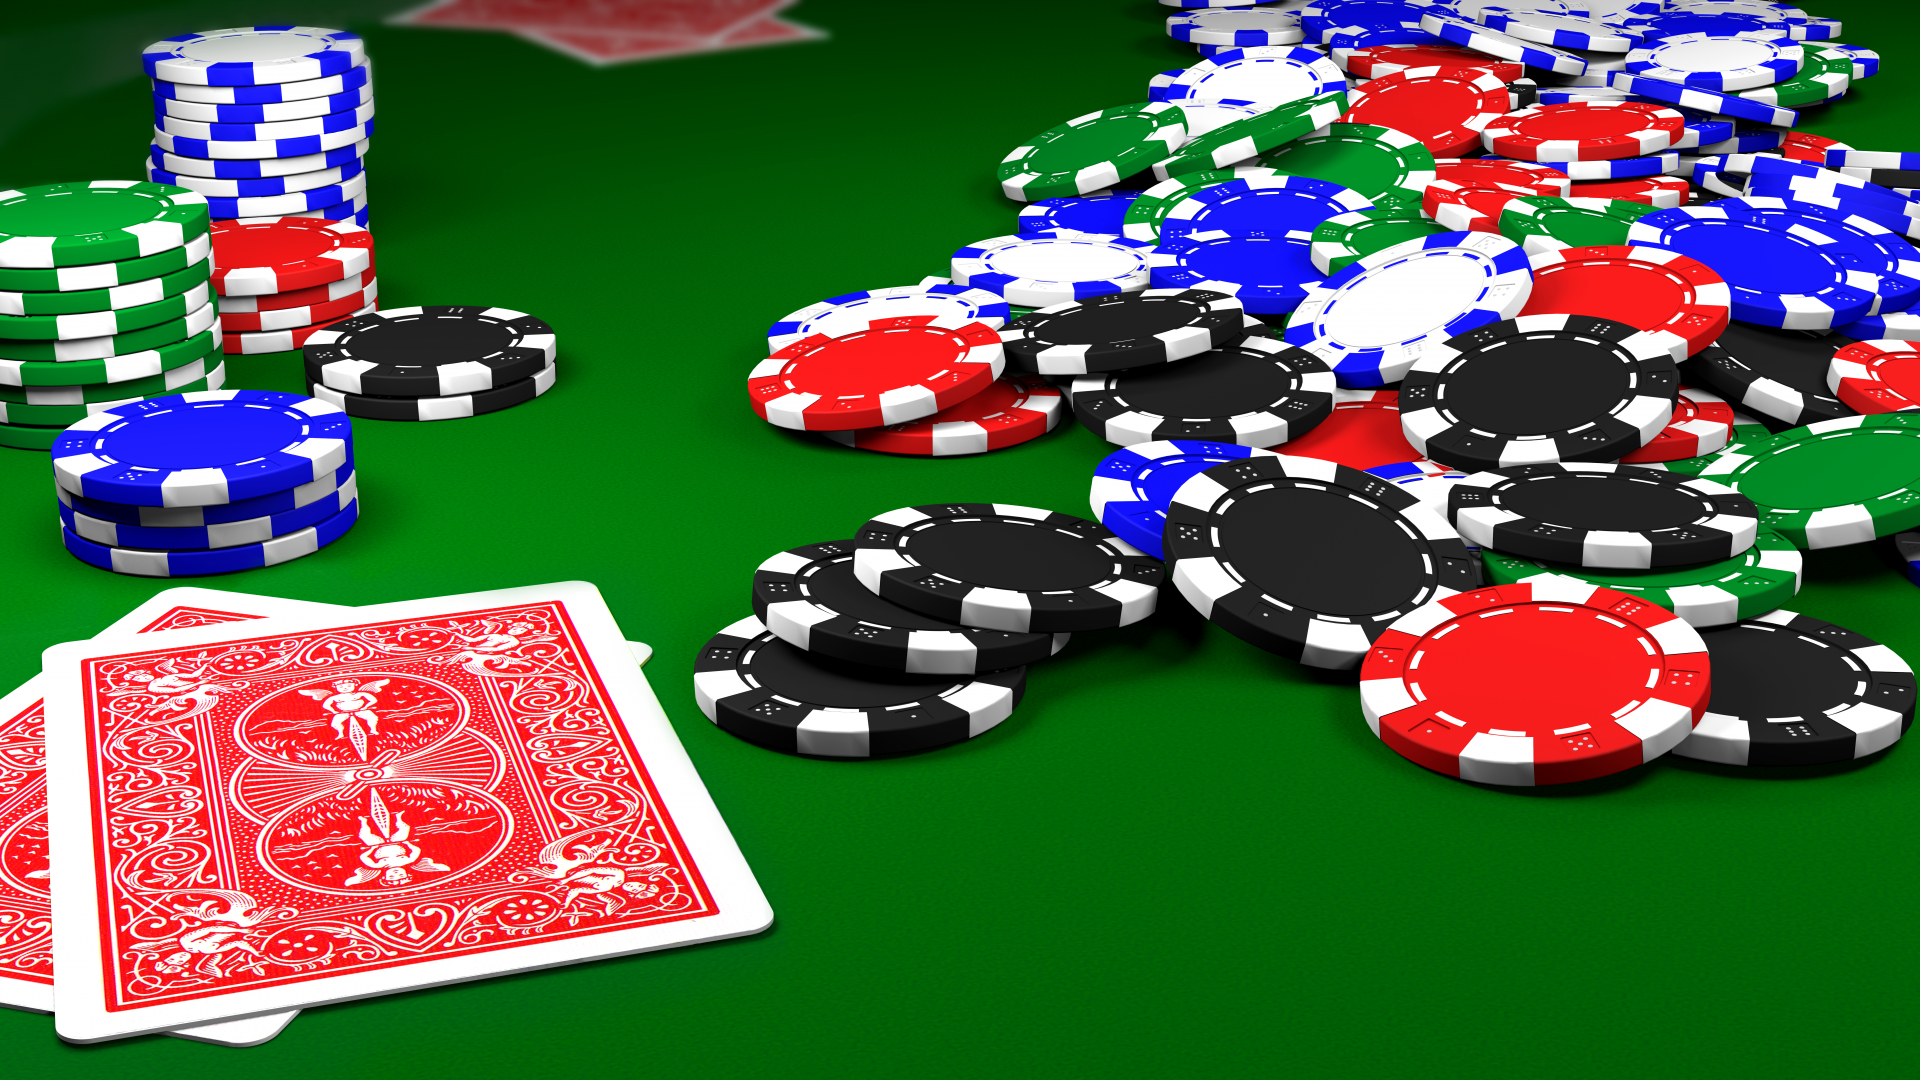 1920x1080 Poker Chips Wallpapers Top Free Poker Chips Backgrounds